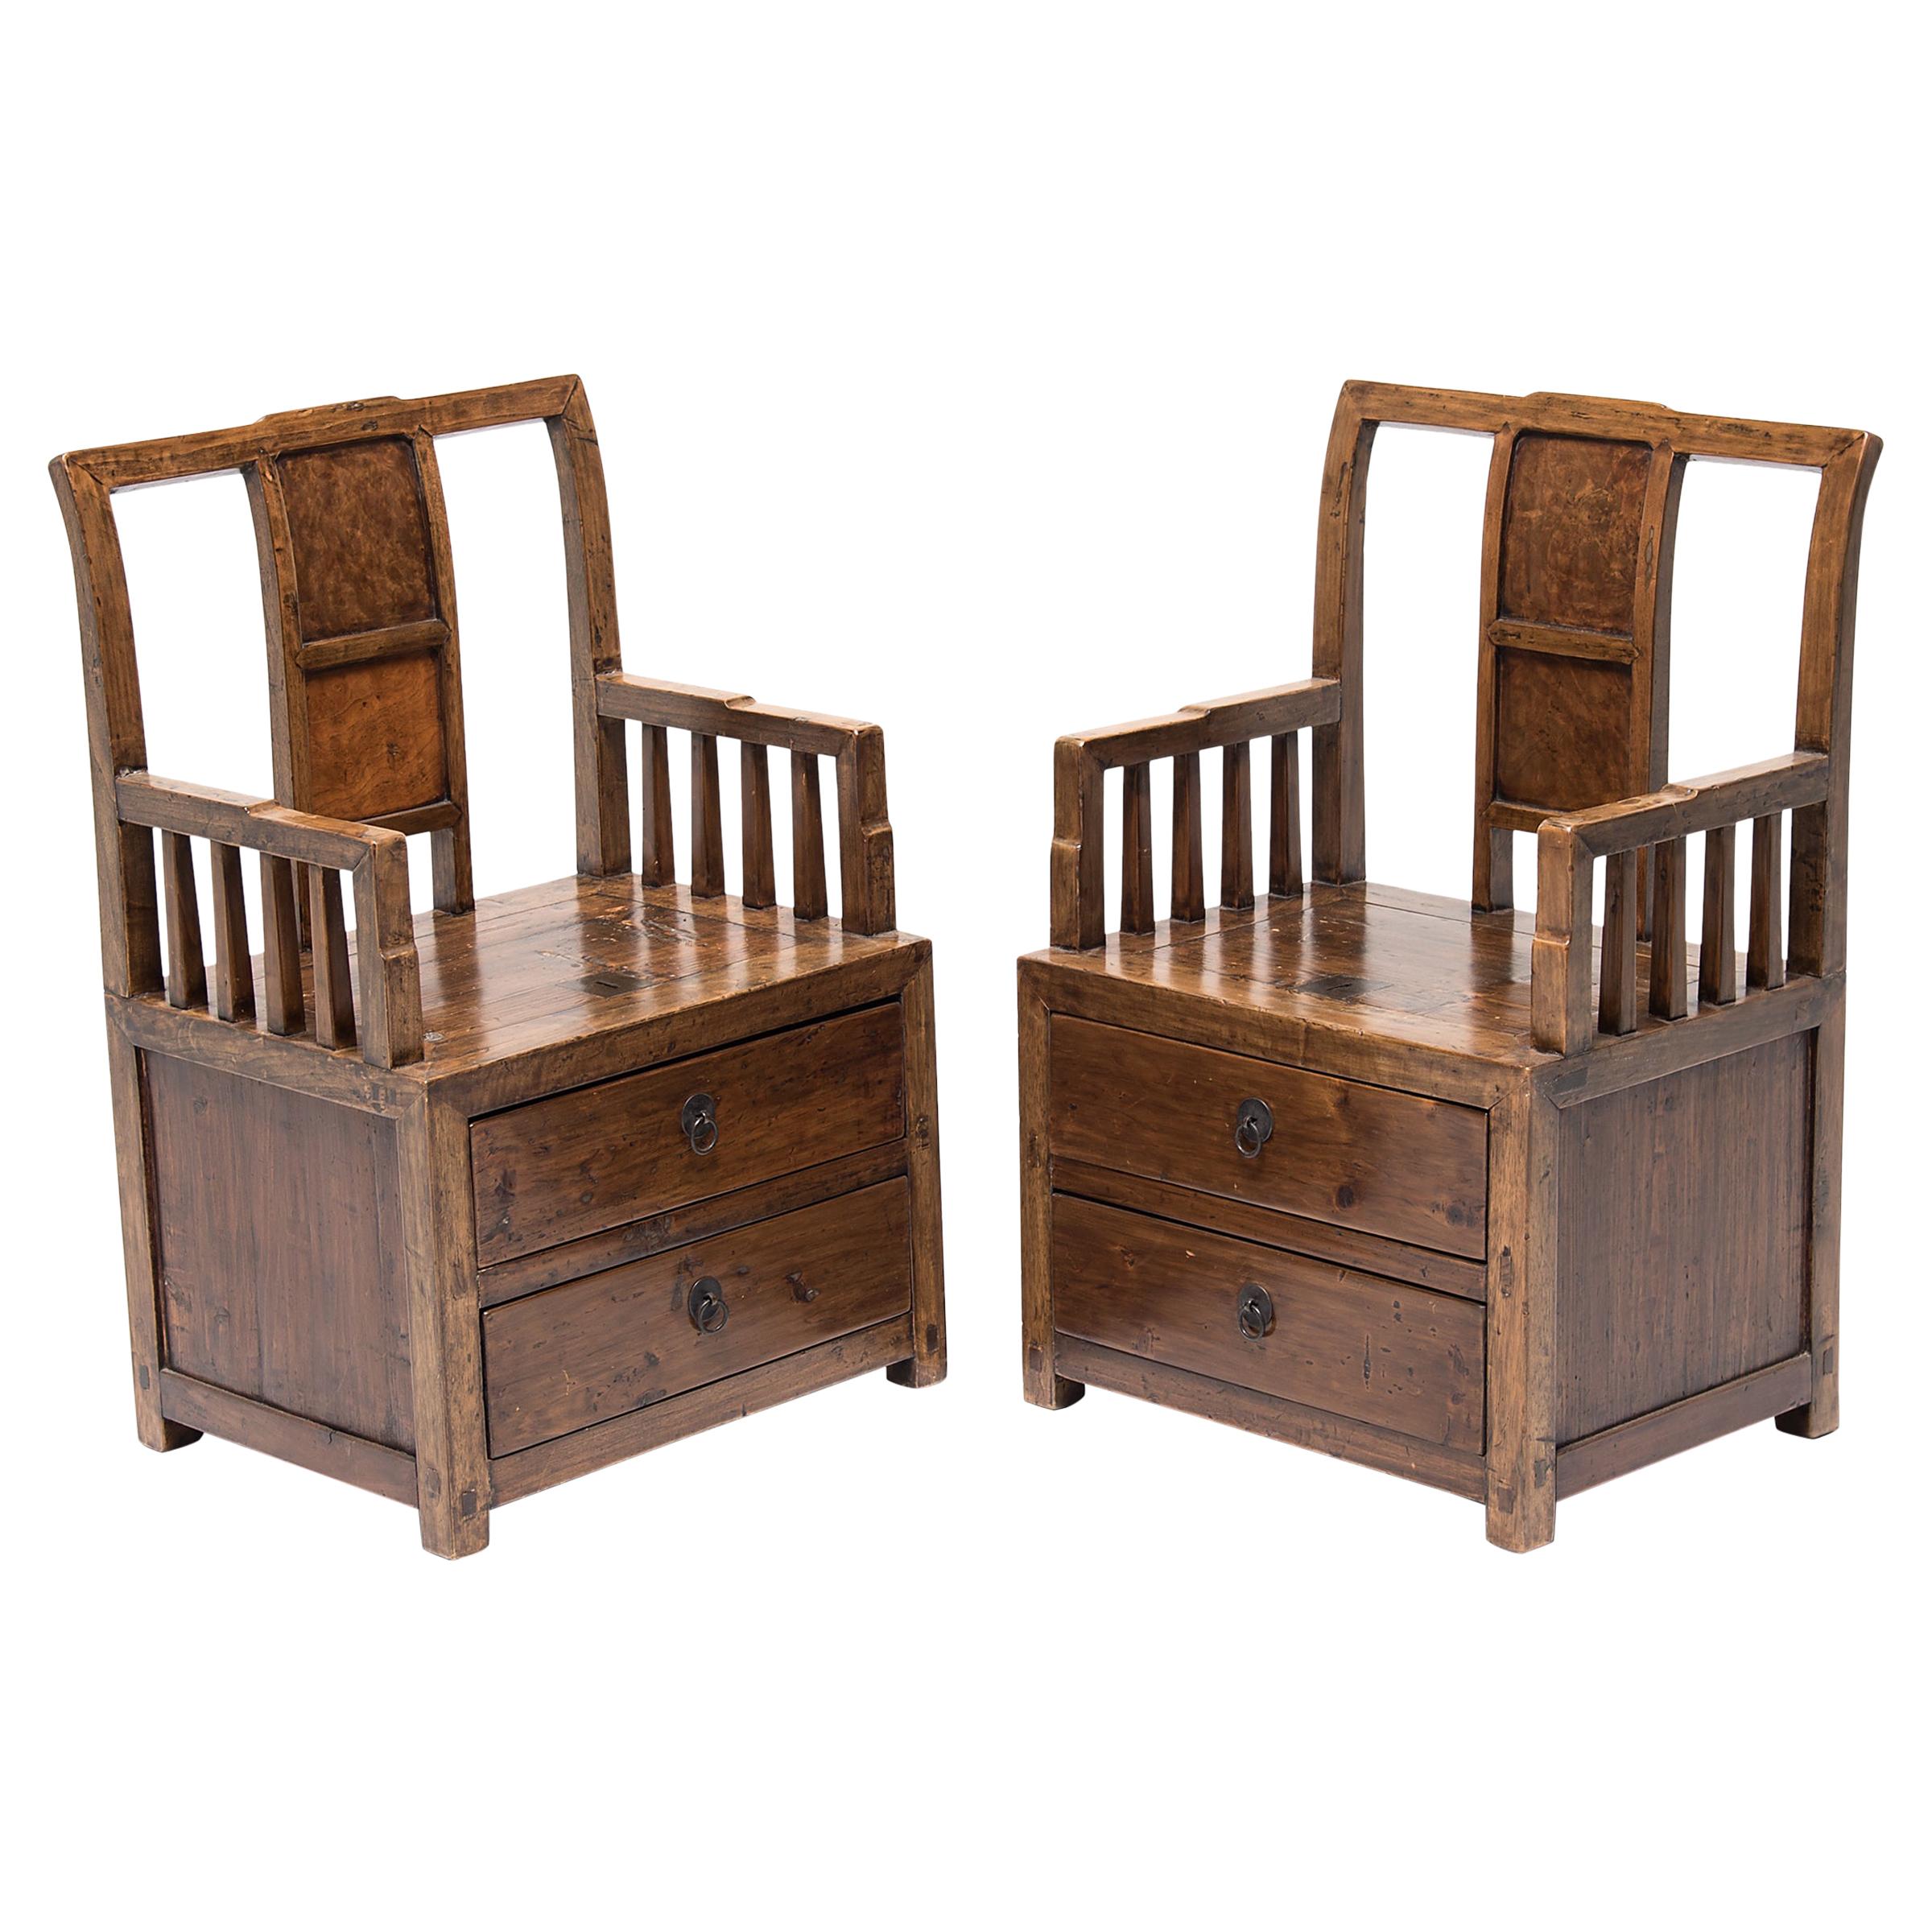 Pair of Chinese Merchant's Armchairs with Burlwood Inlay, c. 1850 For Sale